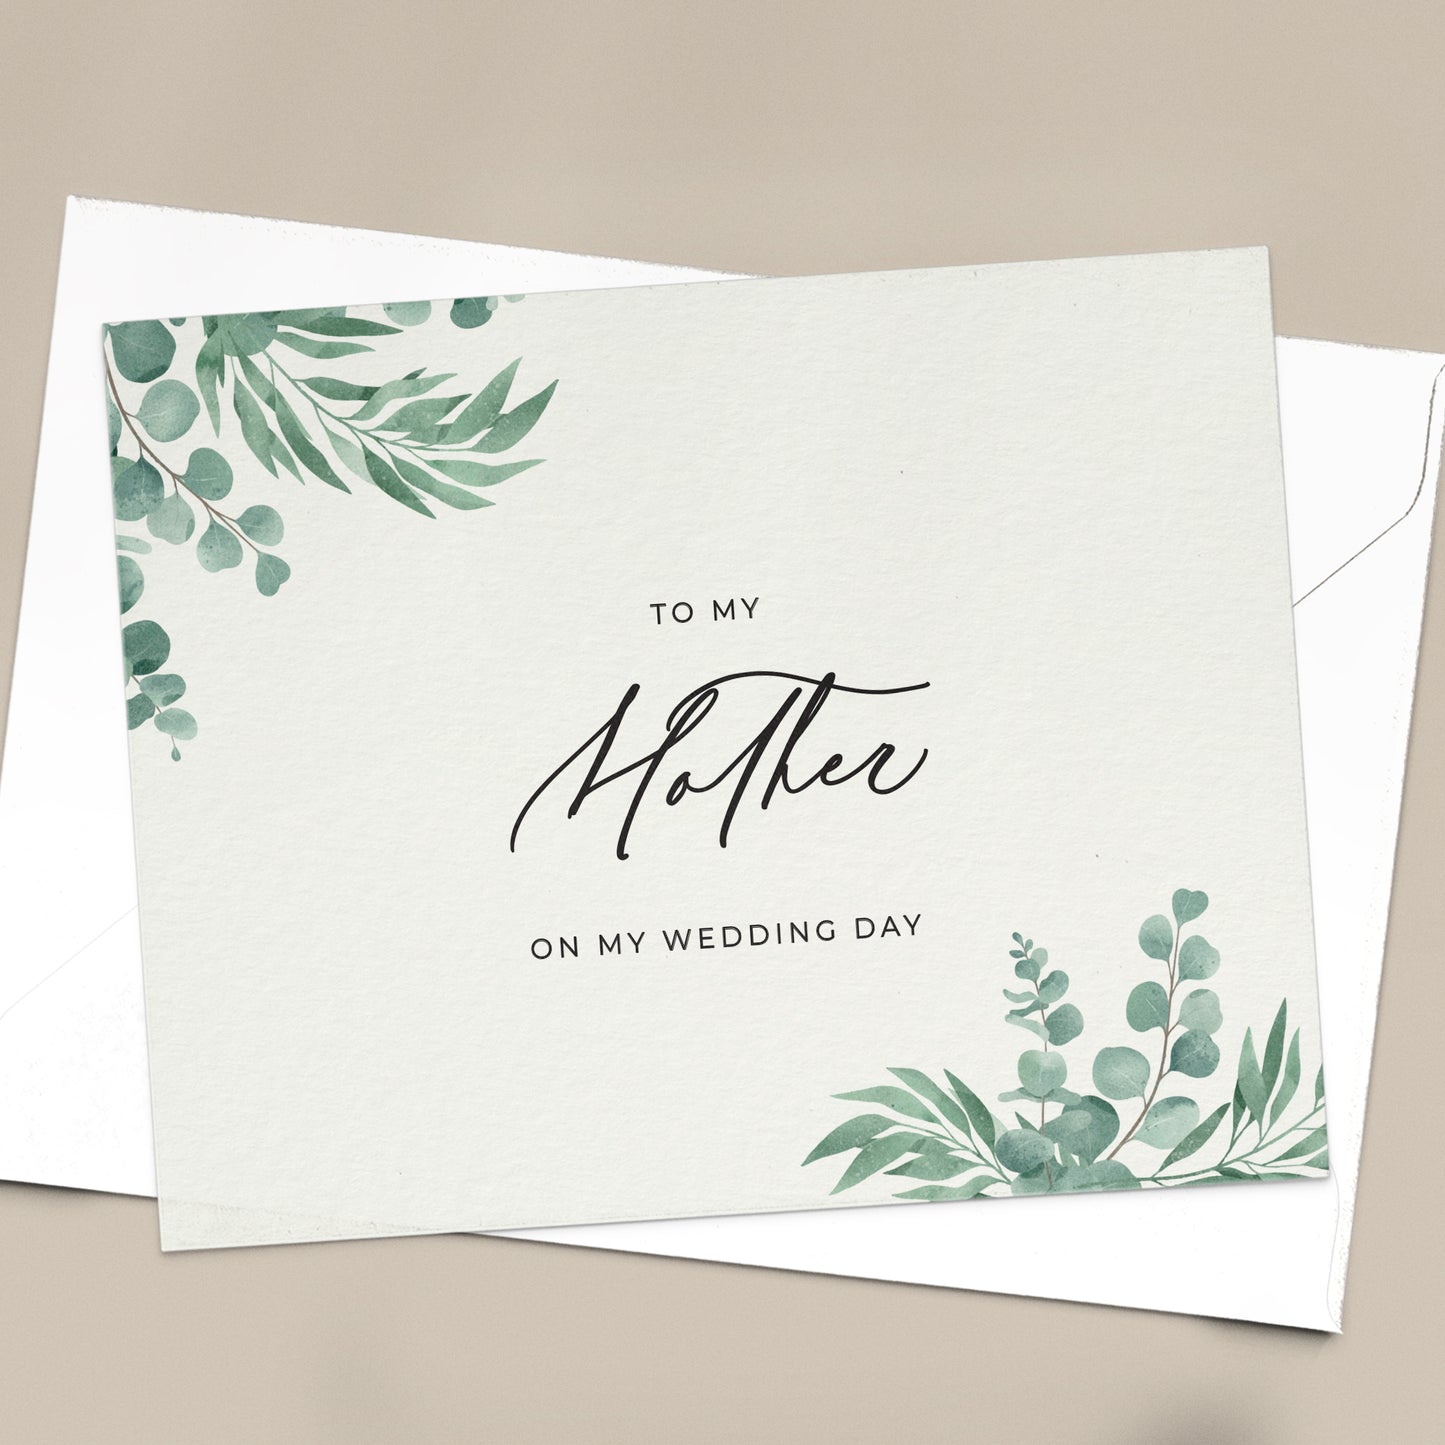 To my mother on my wedding day note card in greenery design with eucalyptus leaves and calligraphy font from XOXOKristen.